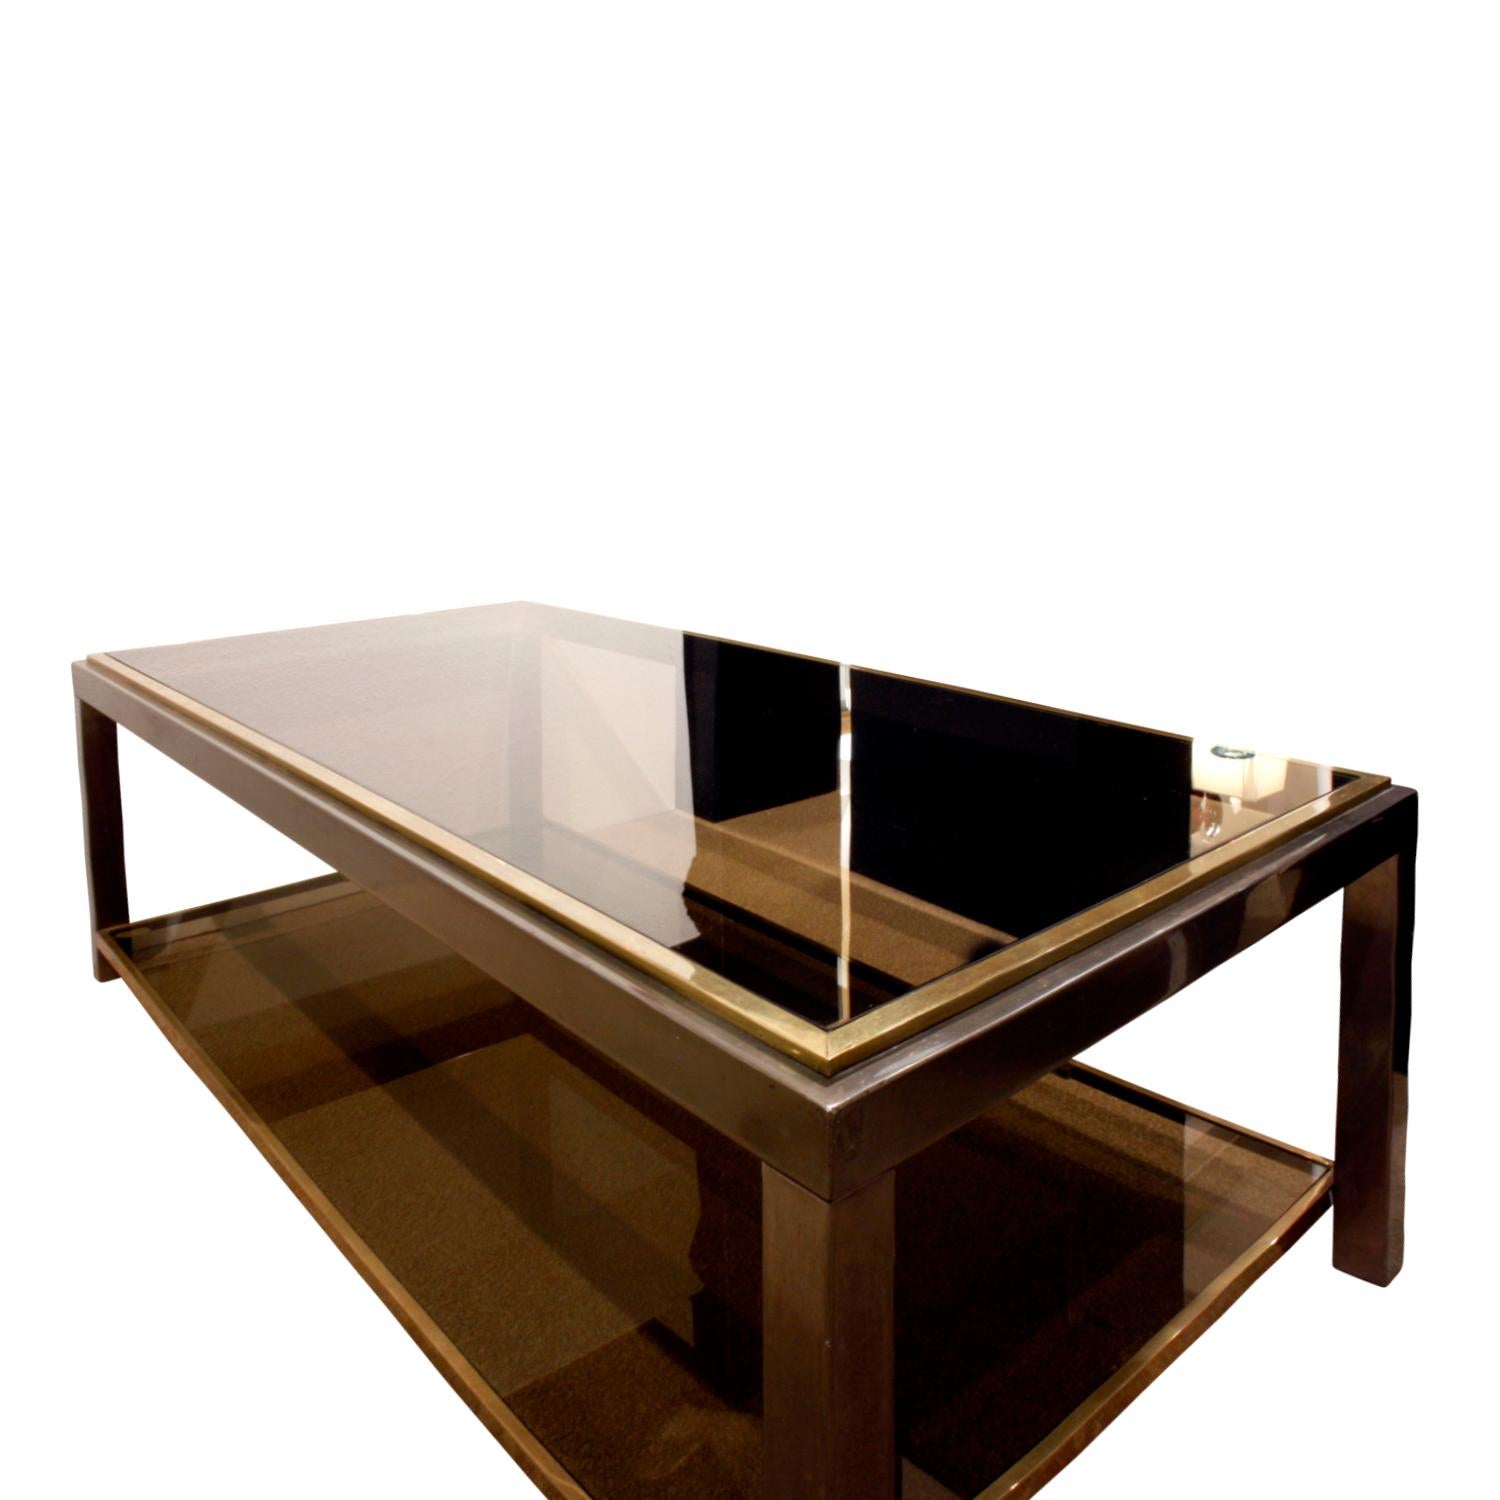 Hand-Crafted Willy Rizzo 2-Tier Coffee Table in Gunmetal and Brass, 1960s